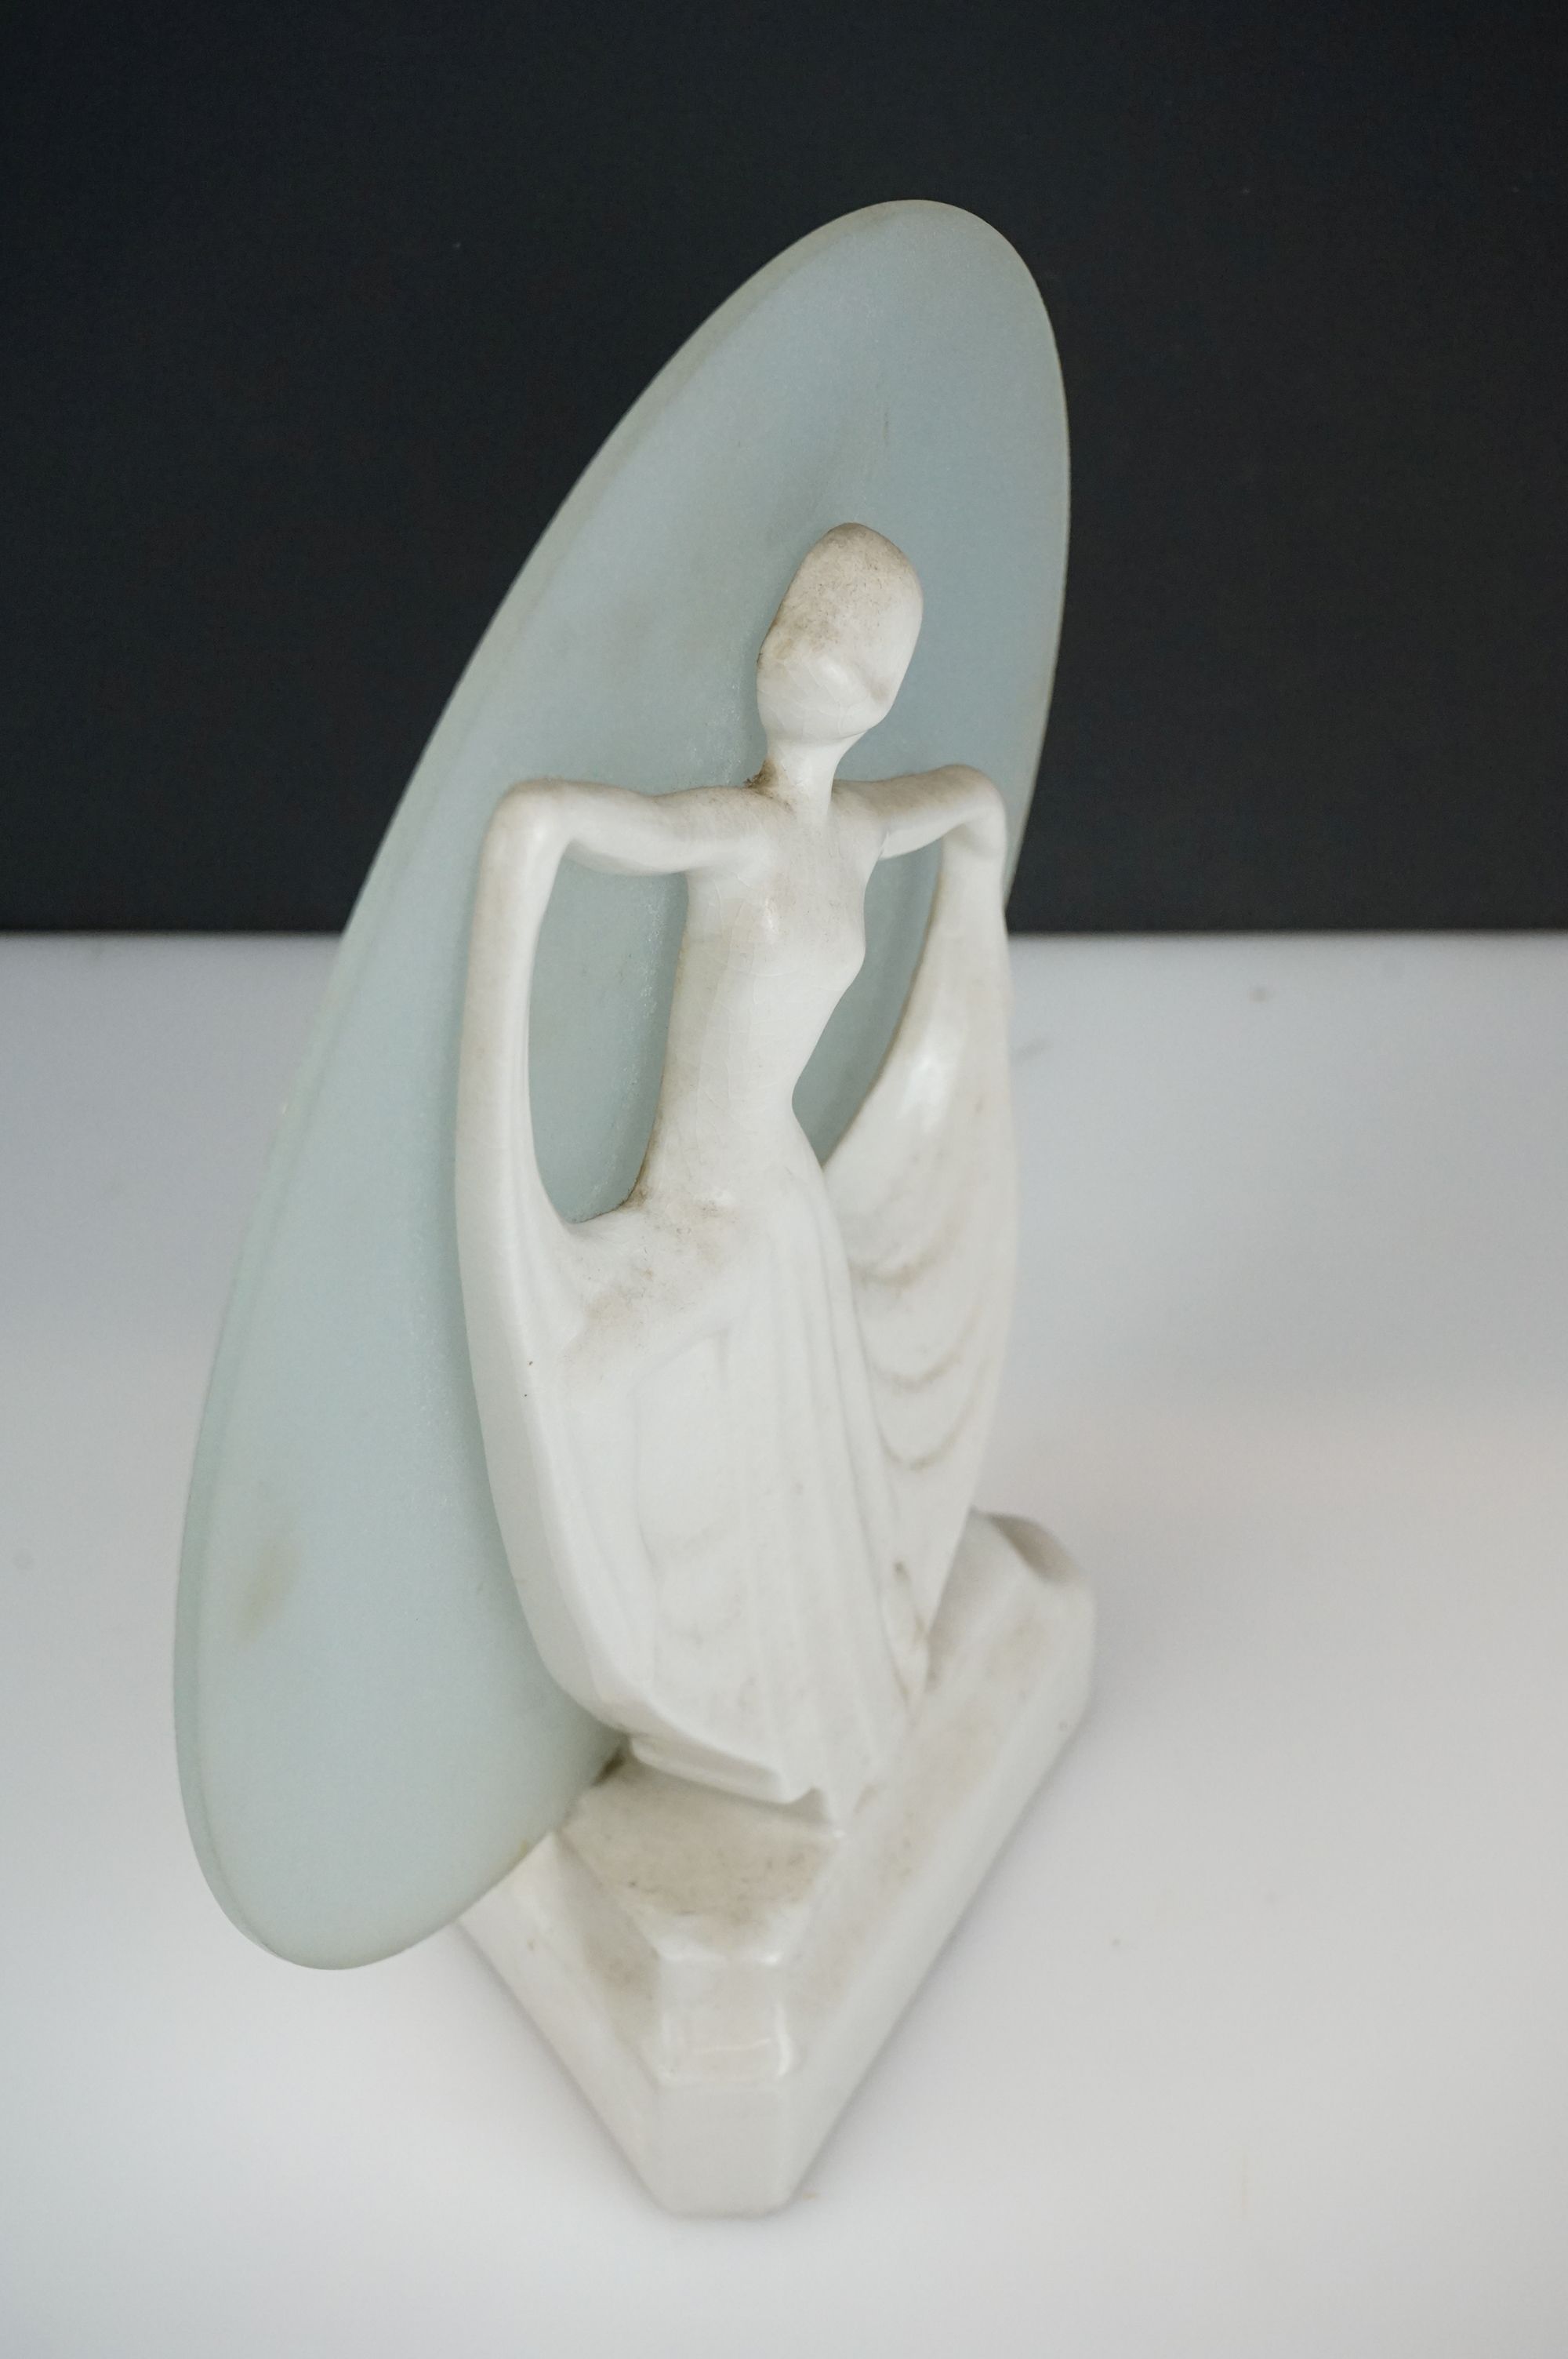 Art Deco White Ceramic Table Lamp in the form of Dancing Lady in front of a frosted glass circular - Image 2 of 3